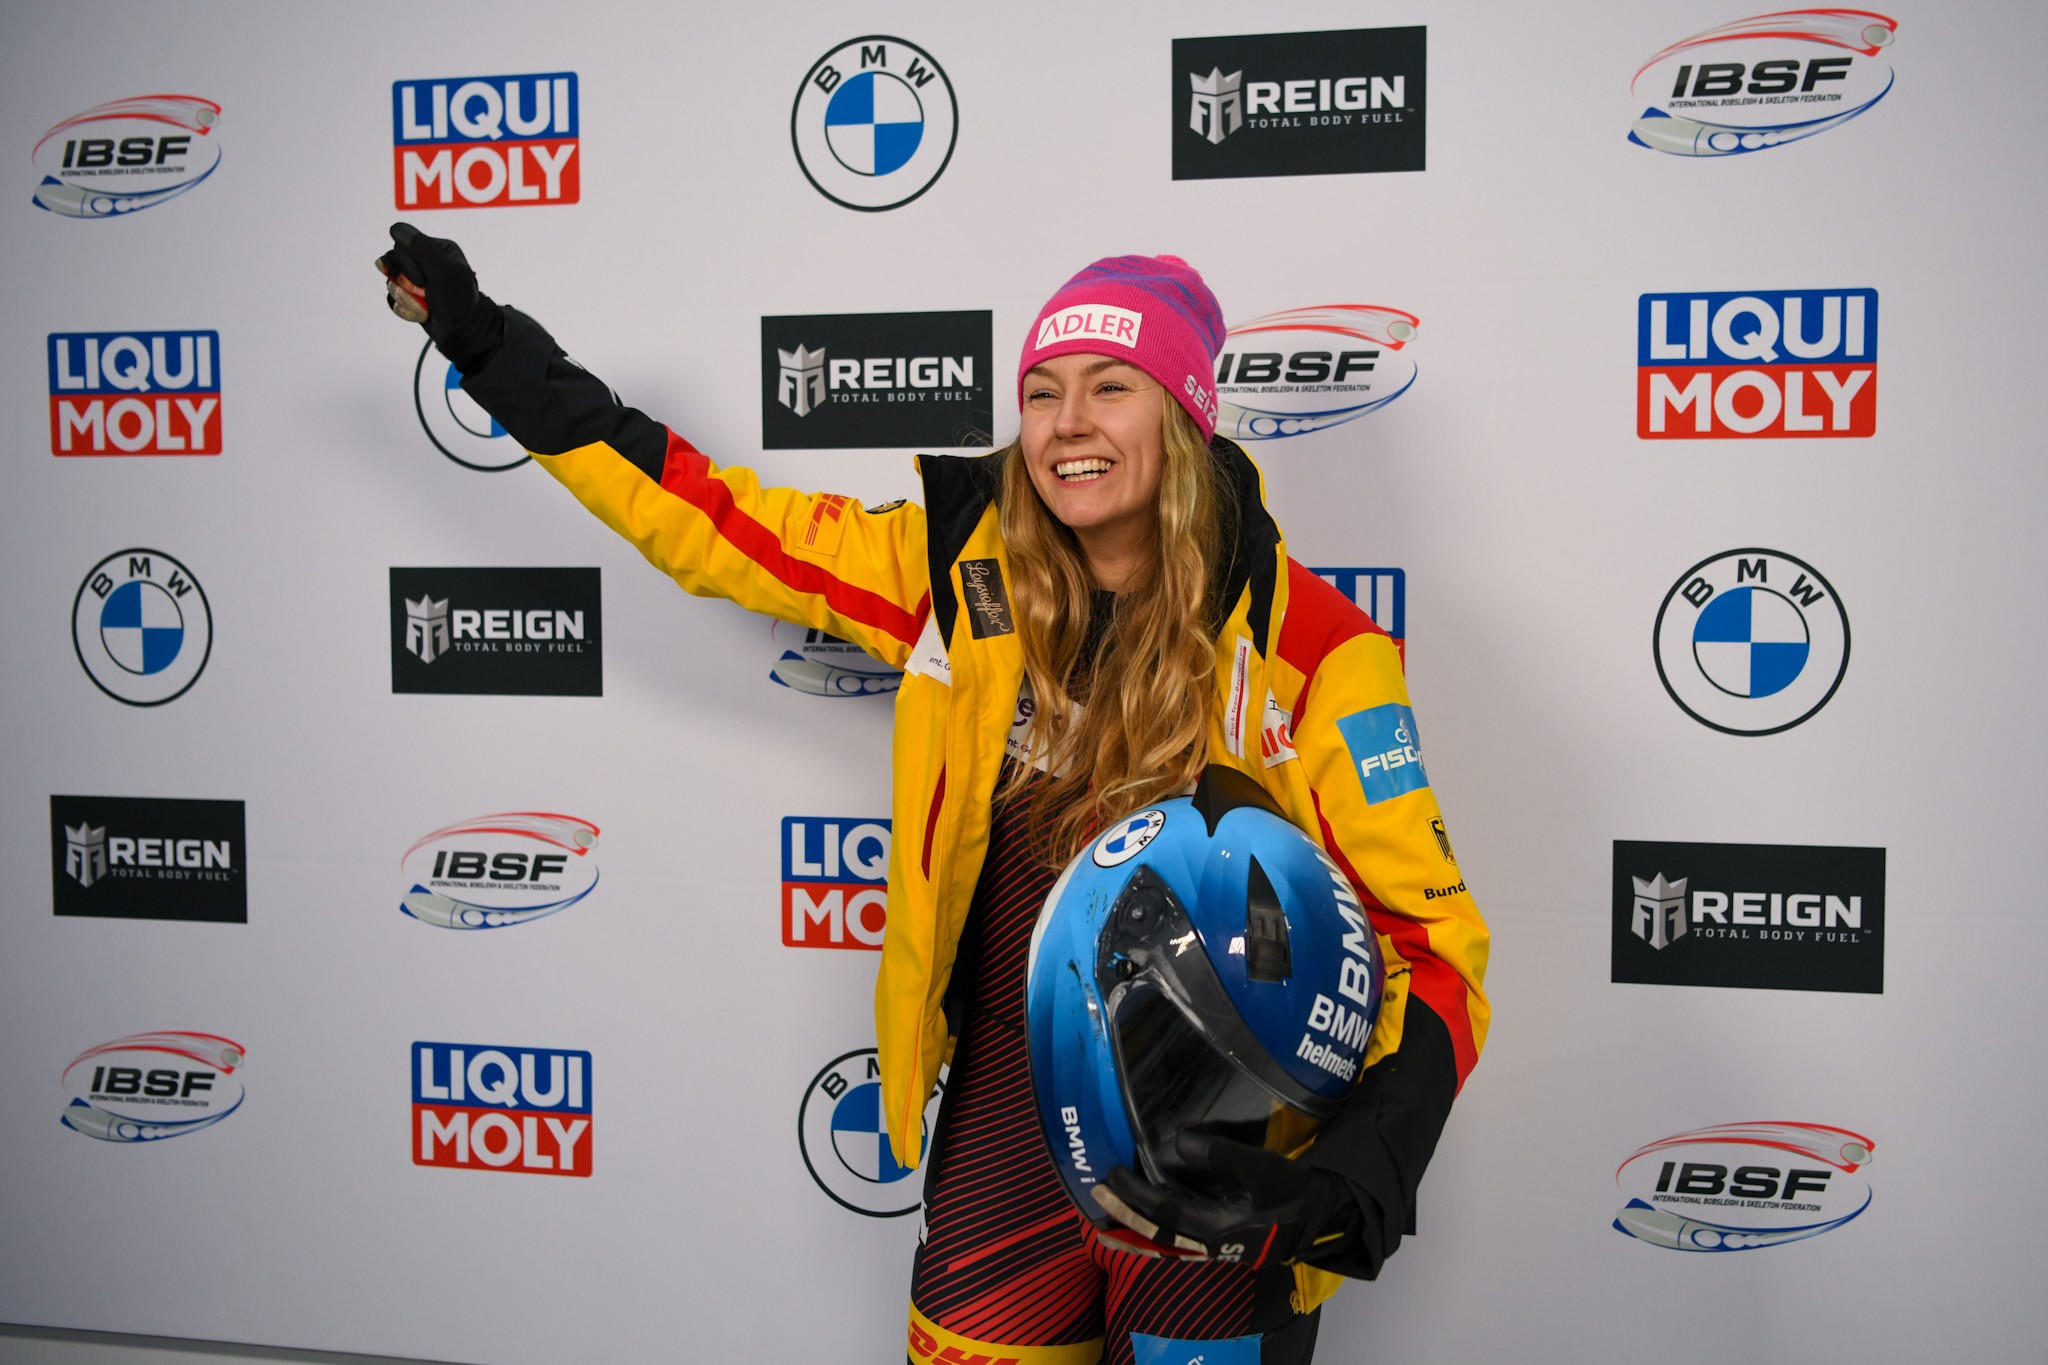 Nolte wins women's monobob gold at IBSF World Cup in Lake Placid 